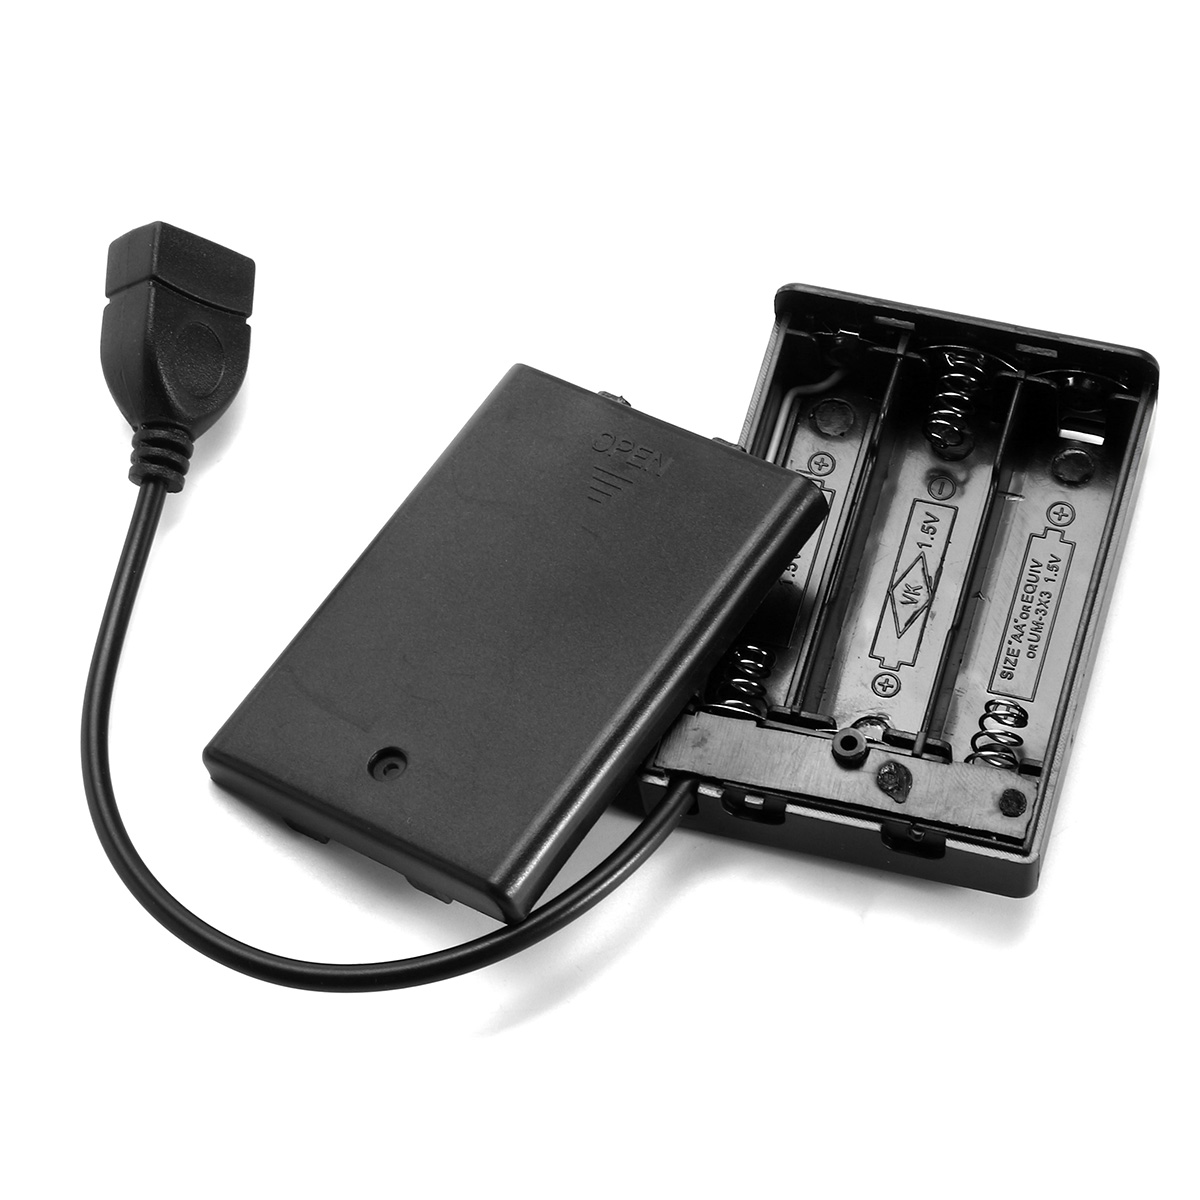 Battery Box With USB Port ...